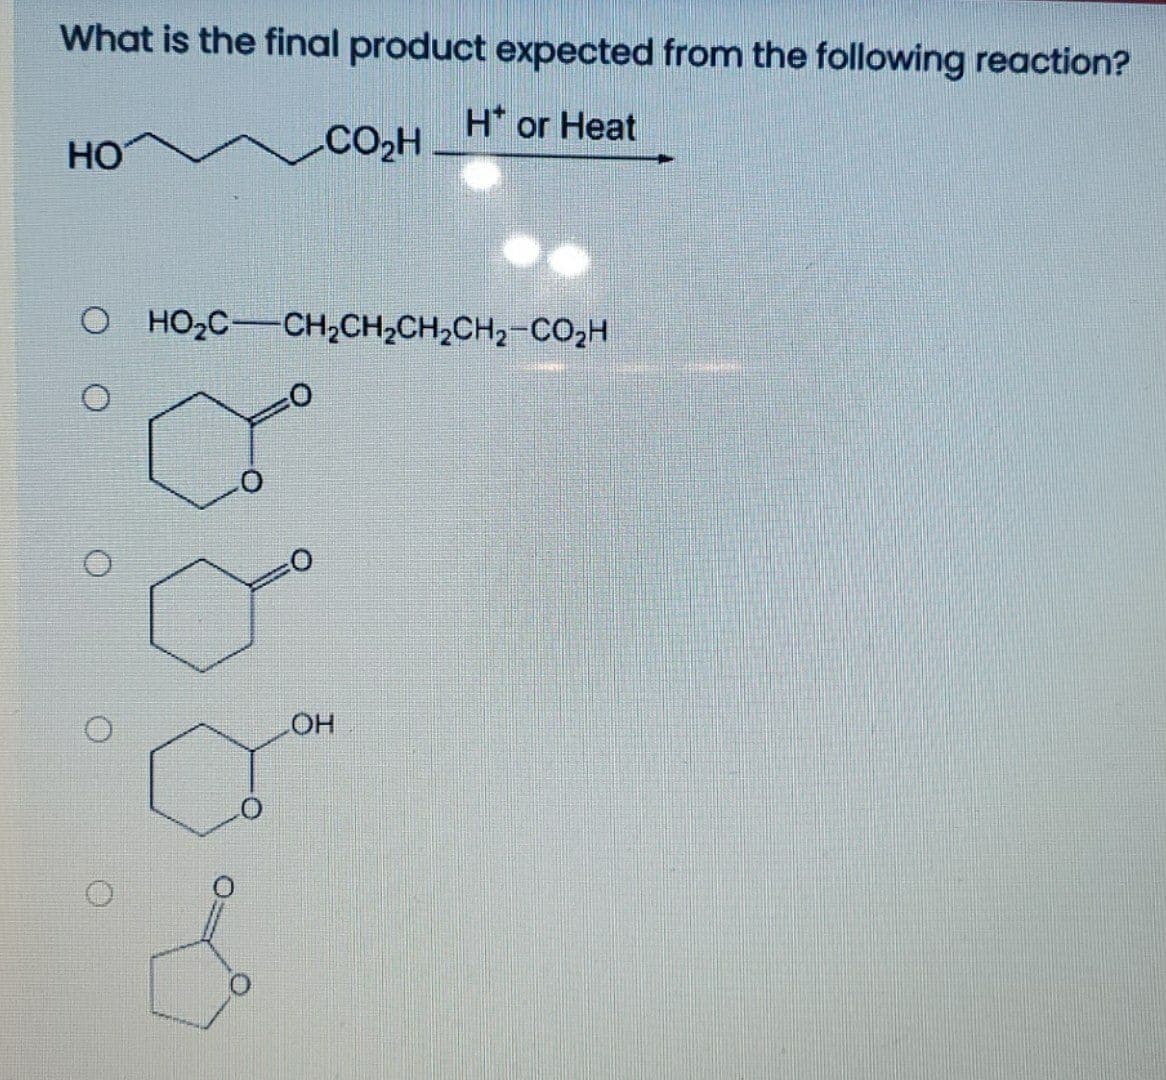 What is the final product expected from the following reaction?
H* or Heat
.CO2H
HO
O HO2C-CH2CH,CH,CH,-CO,H
